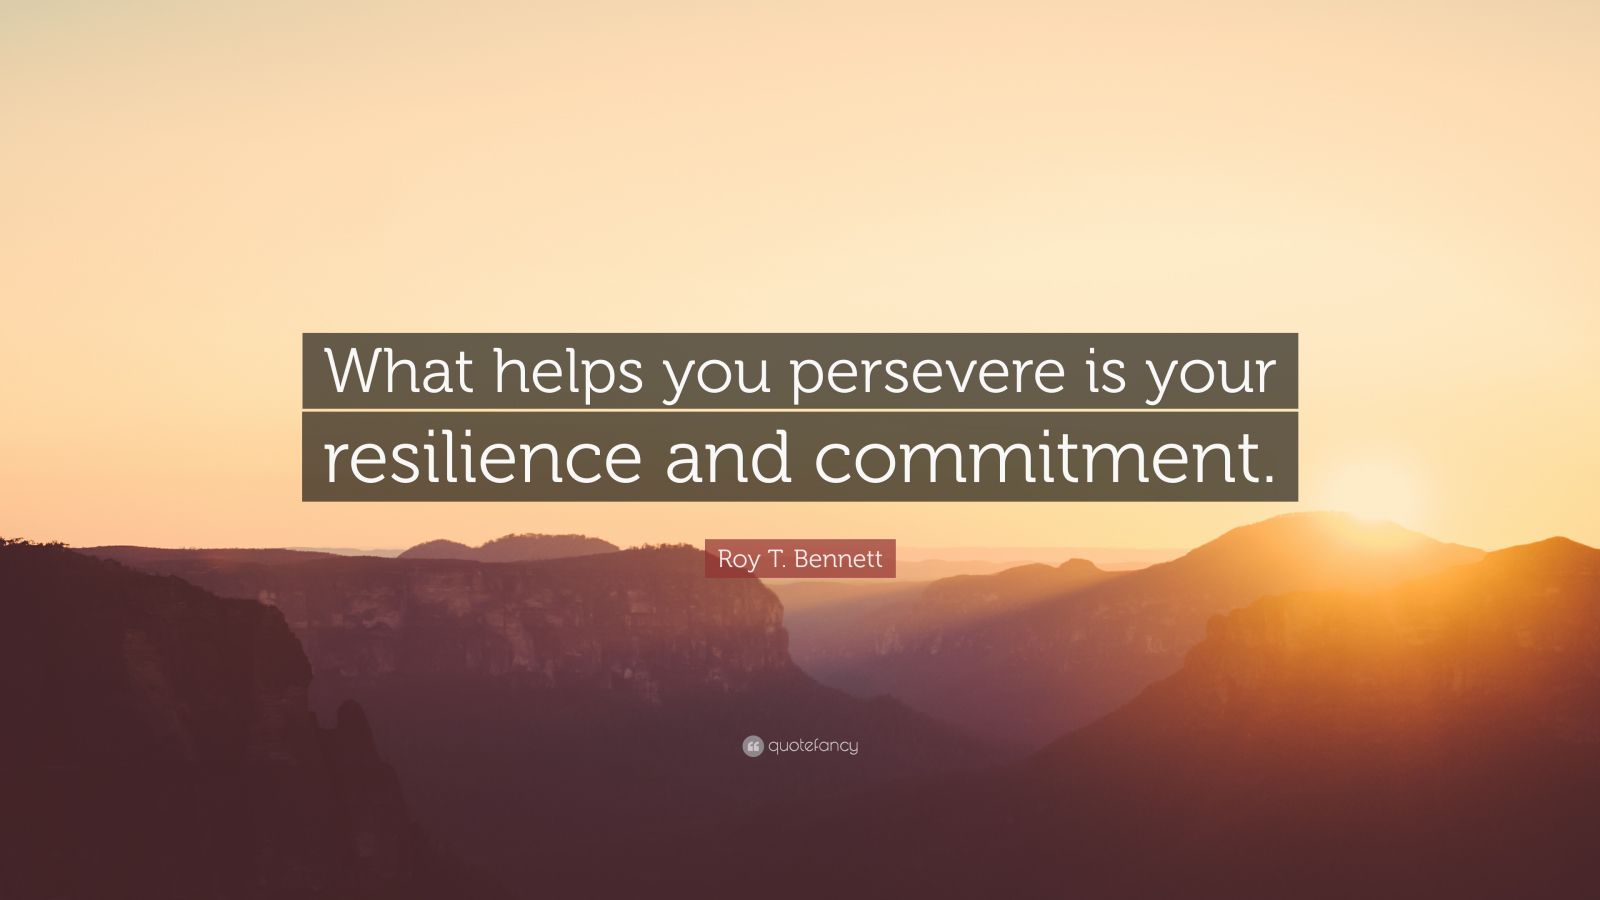 Roy T. Bennett Quote: “What helps you persevere is your resilience and ...